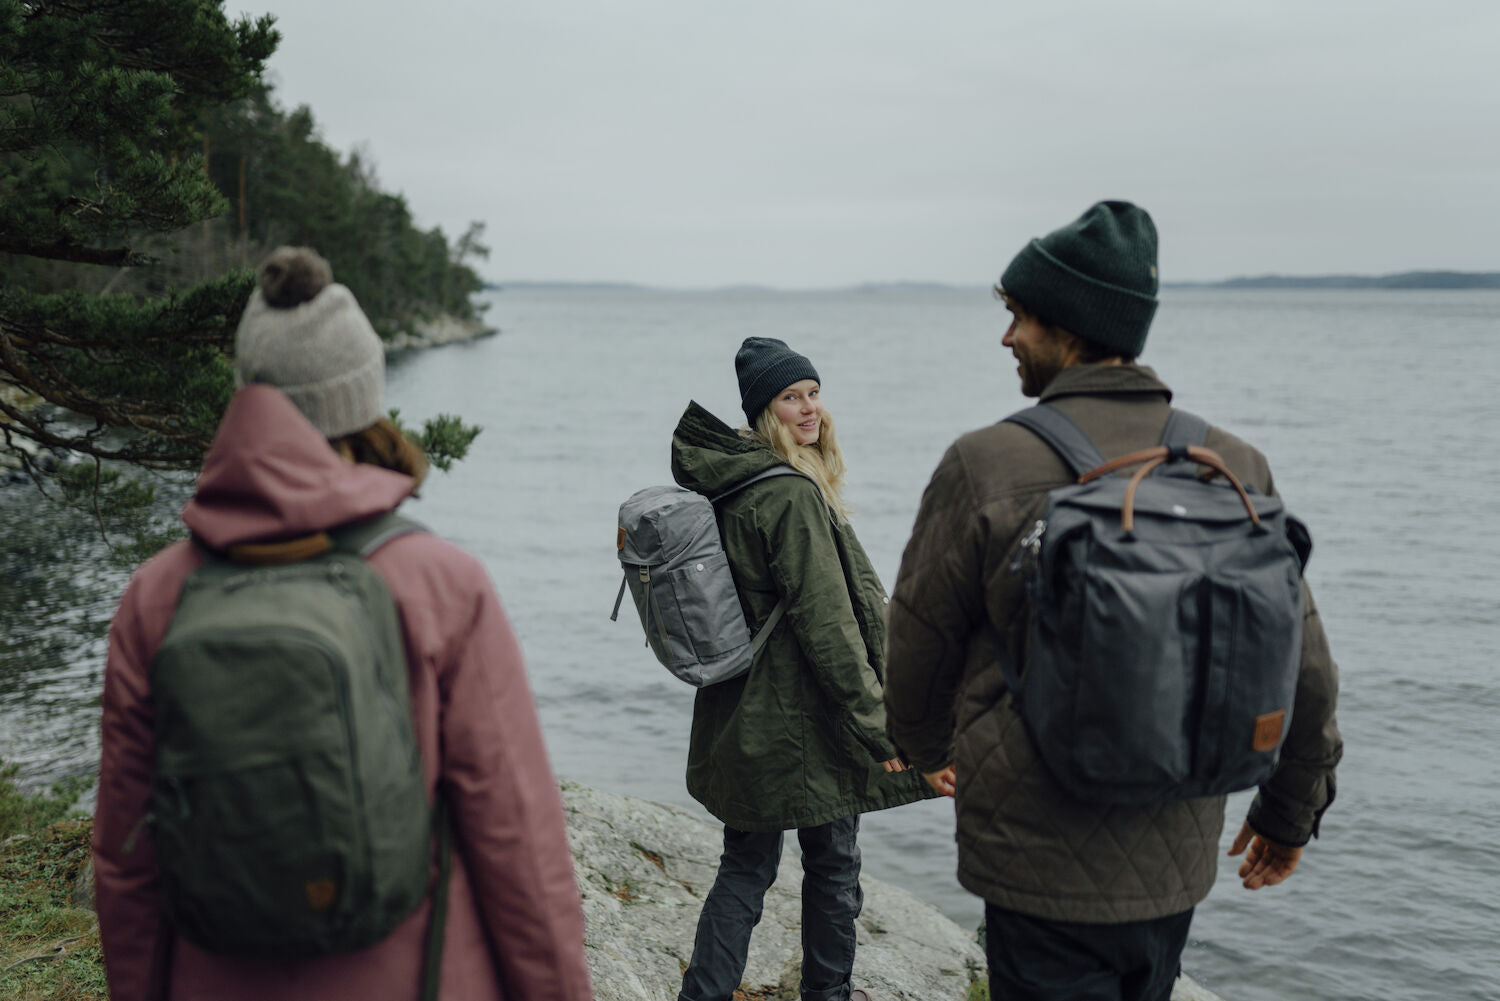 forest adventure with fjallraven backpacks